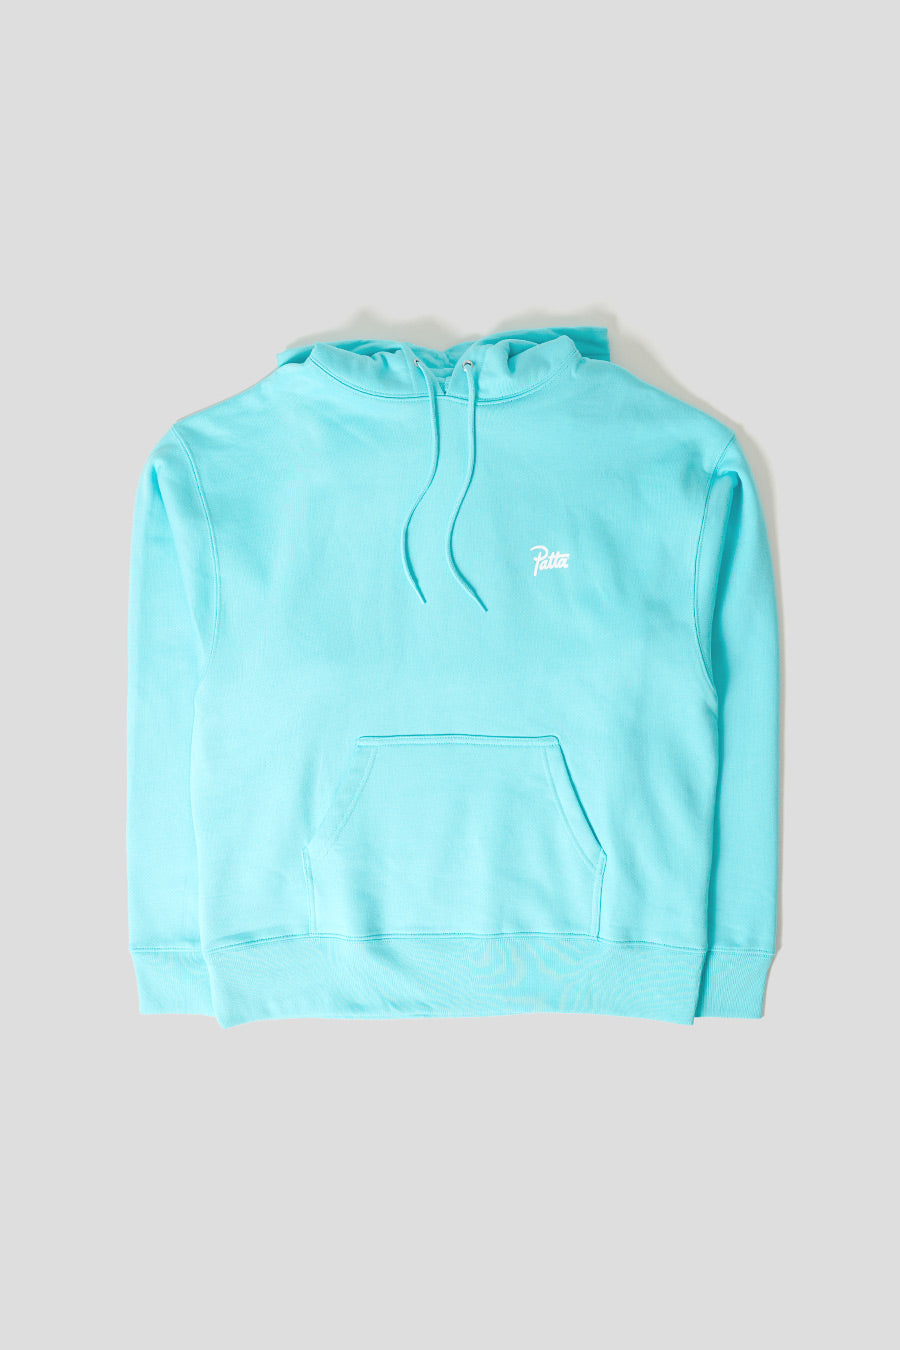 Patta - HOODIE SOME LIKE IT HOT BLEU TURQUOISE - LE LABO STORE